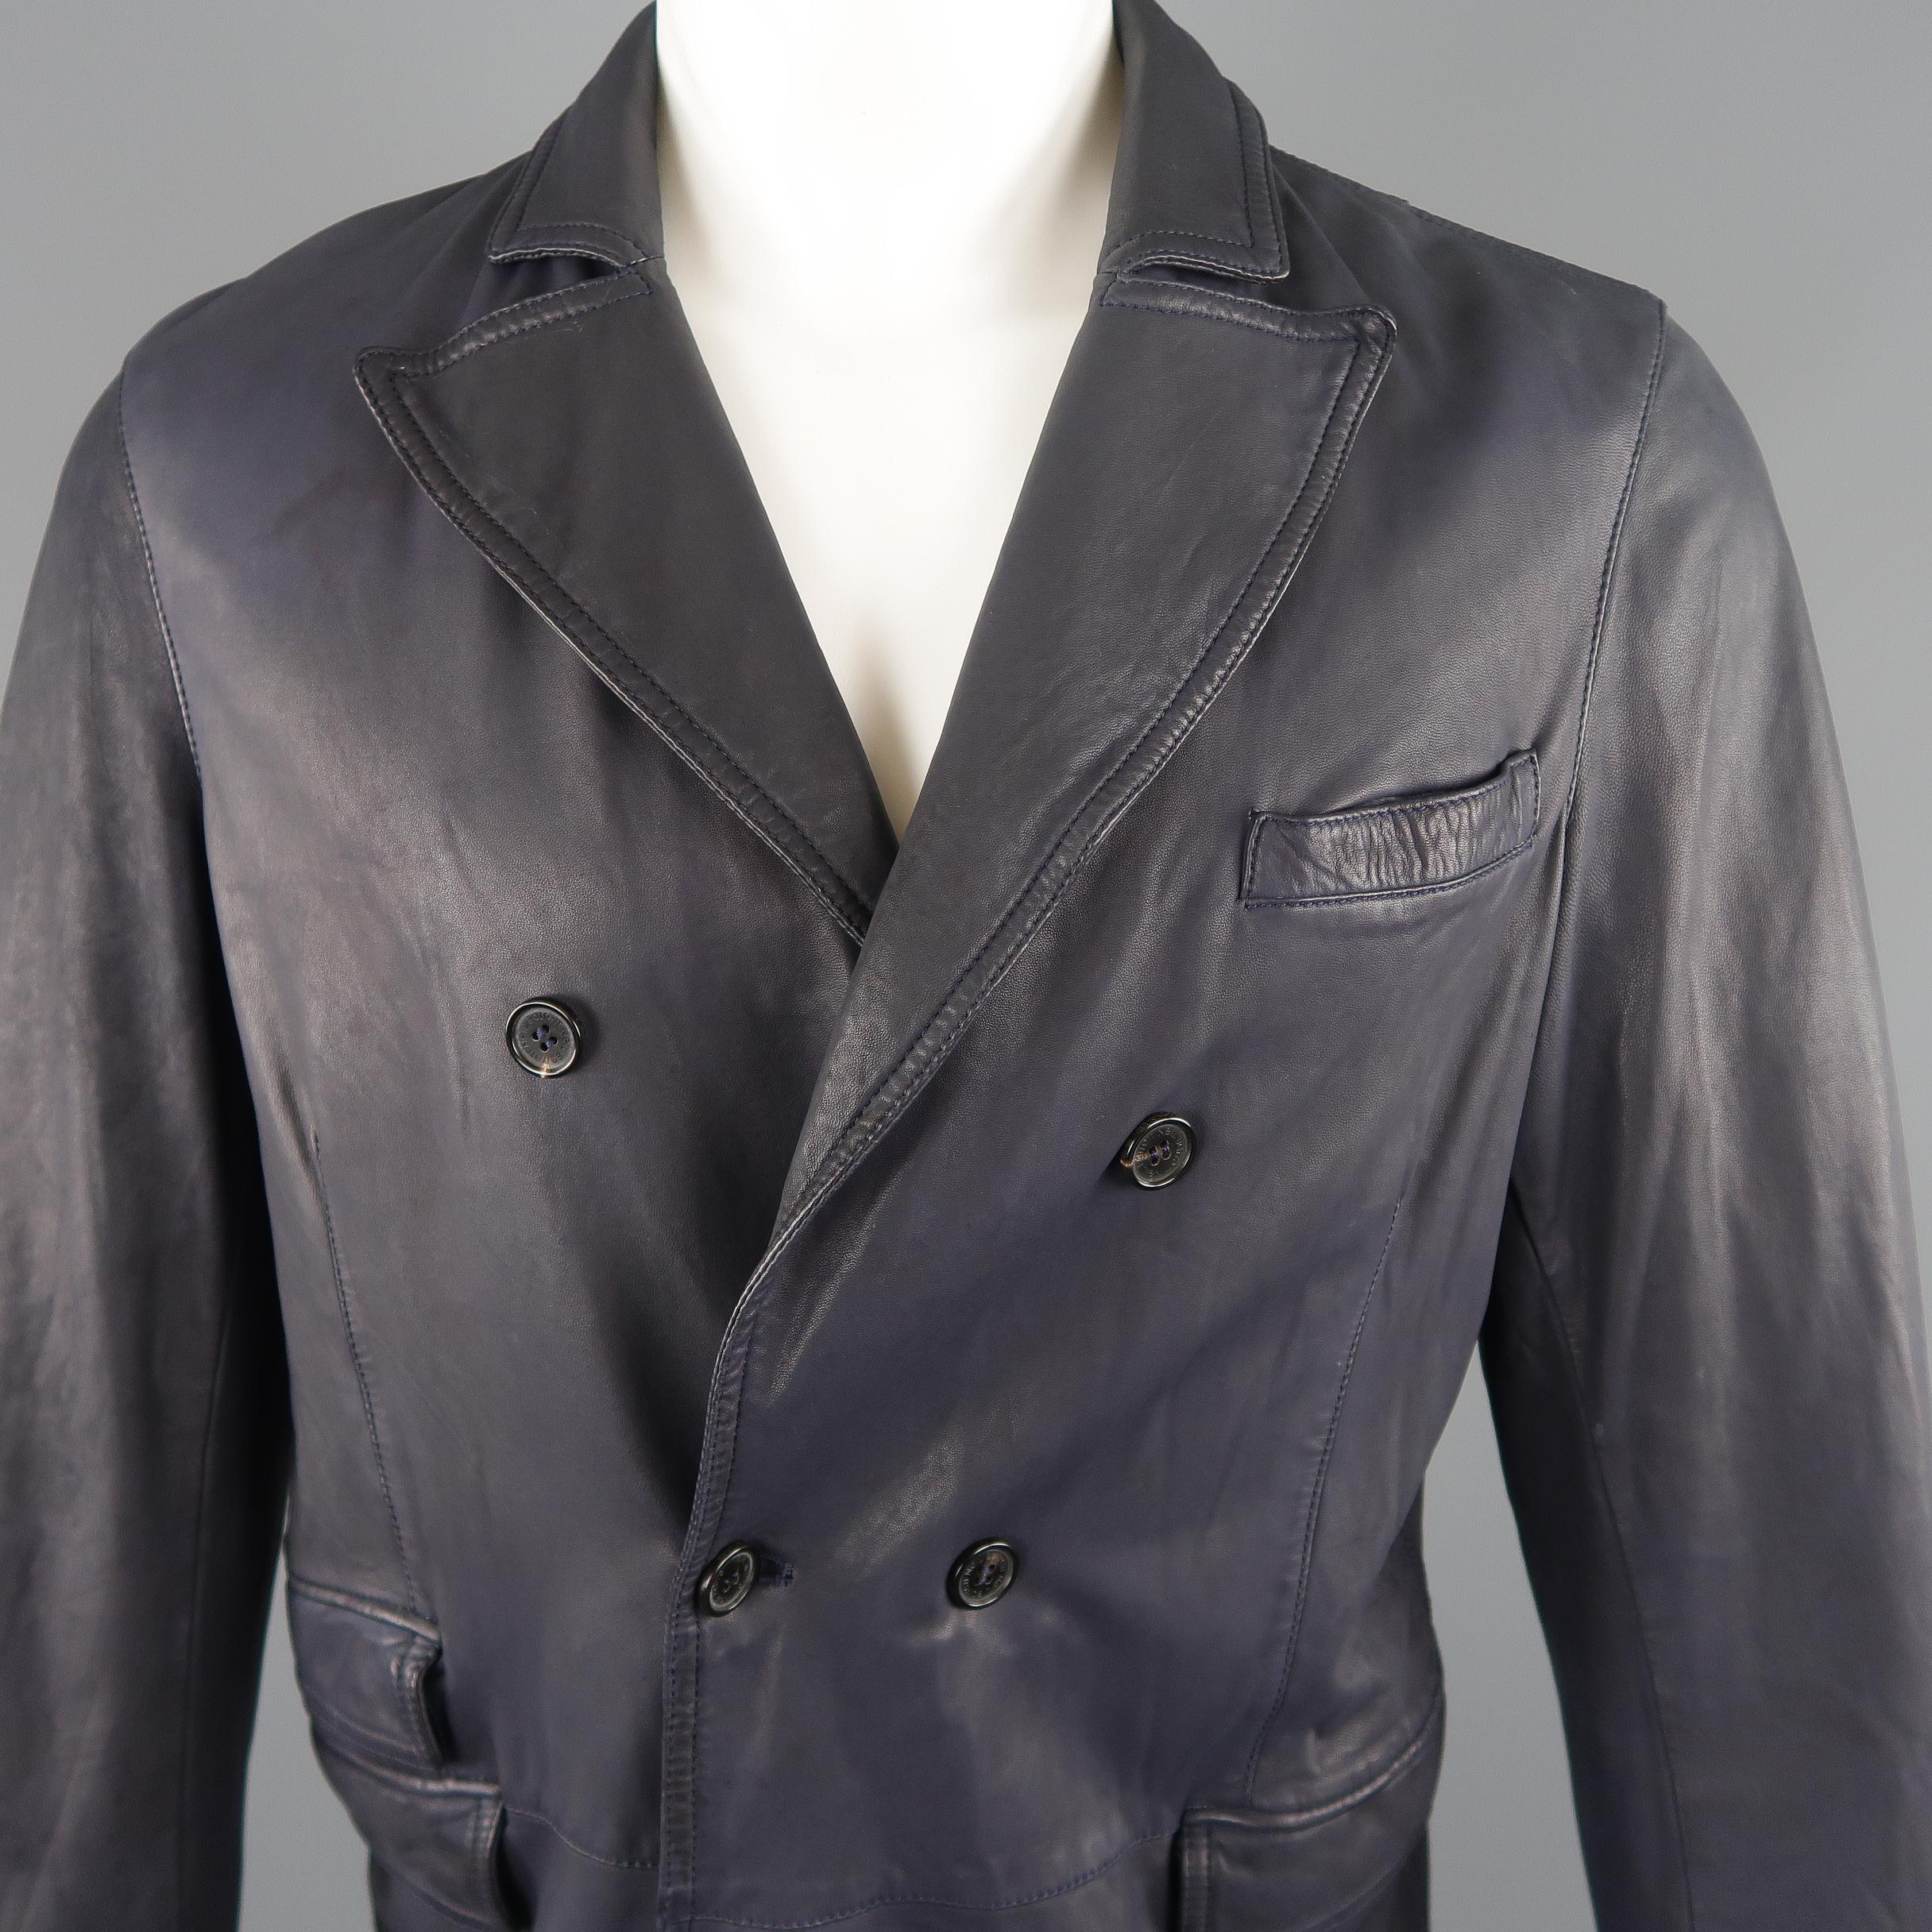 Double breasted NEIL BARRETT sport coat comes in muted navy blue leather with a peak lapel, and flap pockets. Wear consistent with age. Made in Italy.
 
Good Pre-Owned Condition.
Marked: M
 
Measurements:
 
Shoulder: 18 in.
Chest: 44 in.
Sleeve:  26